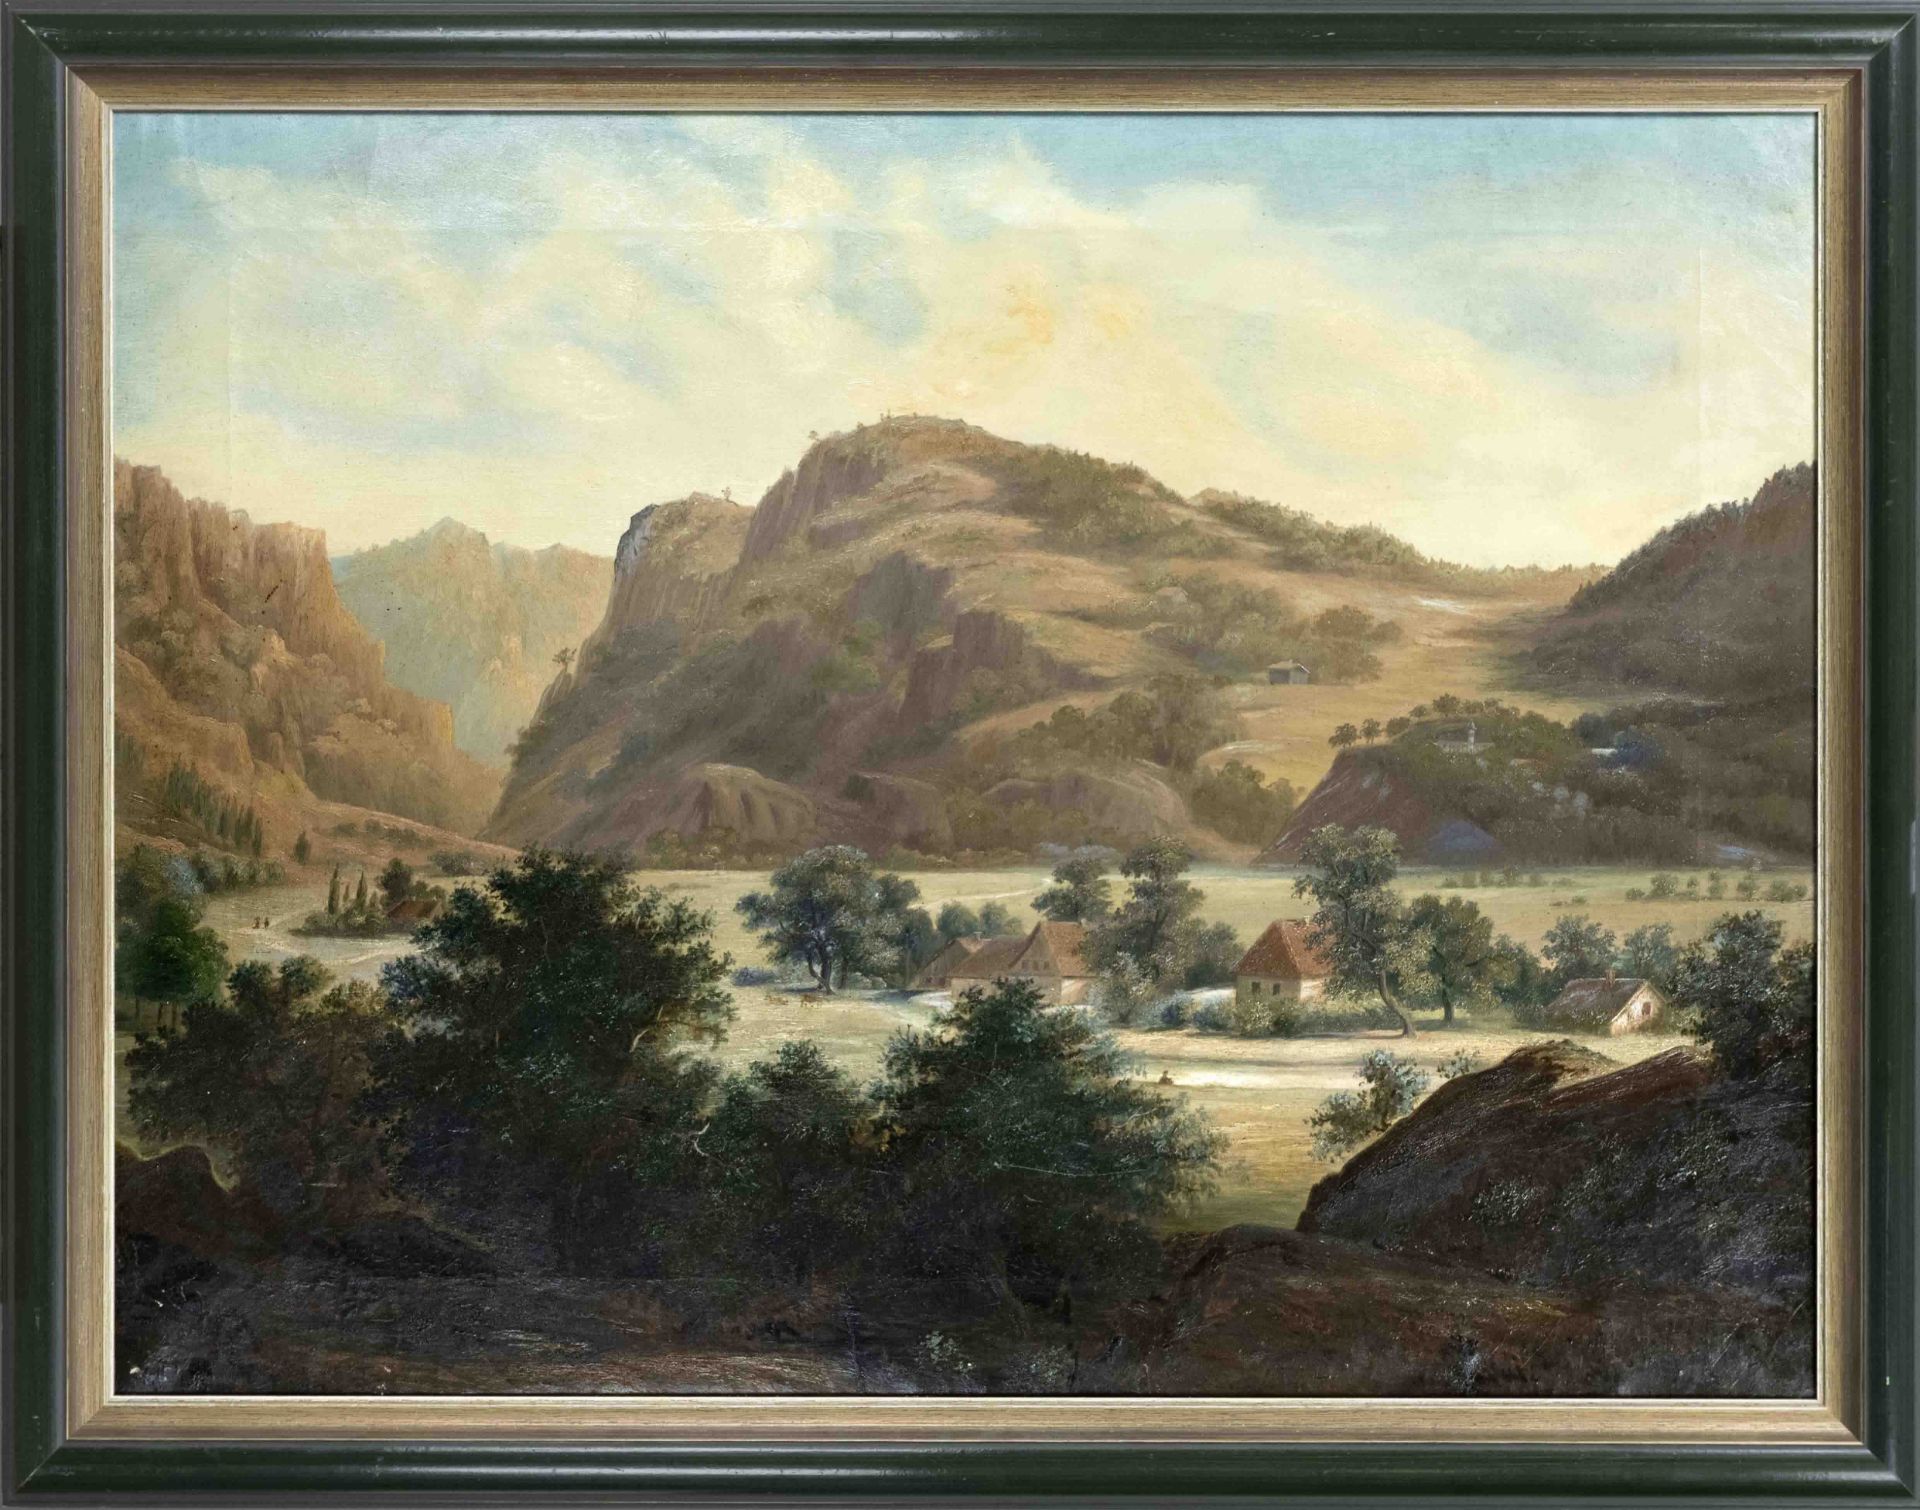 Anonymous artist of the 19th century, View of a valley with houses surrounded by rocks, oil on